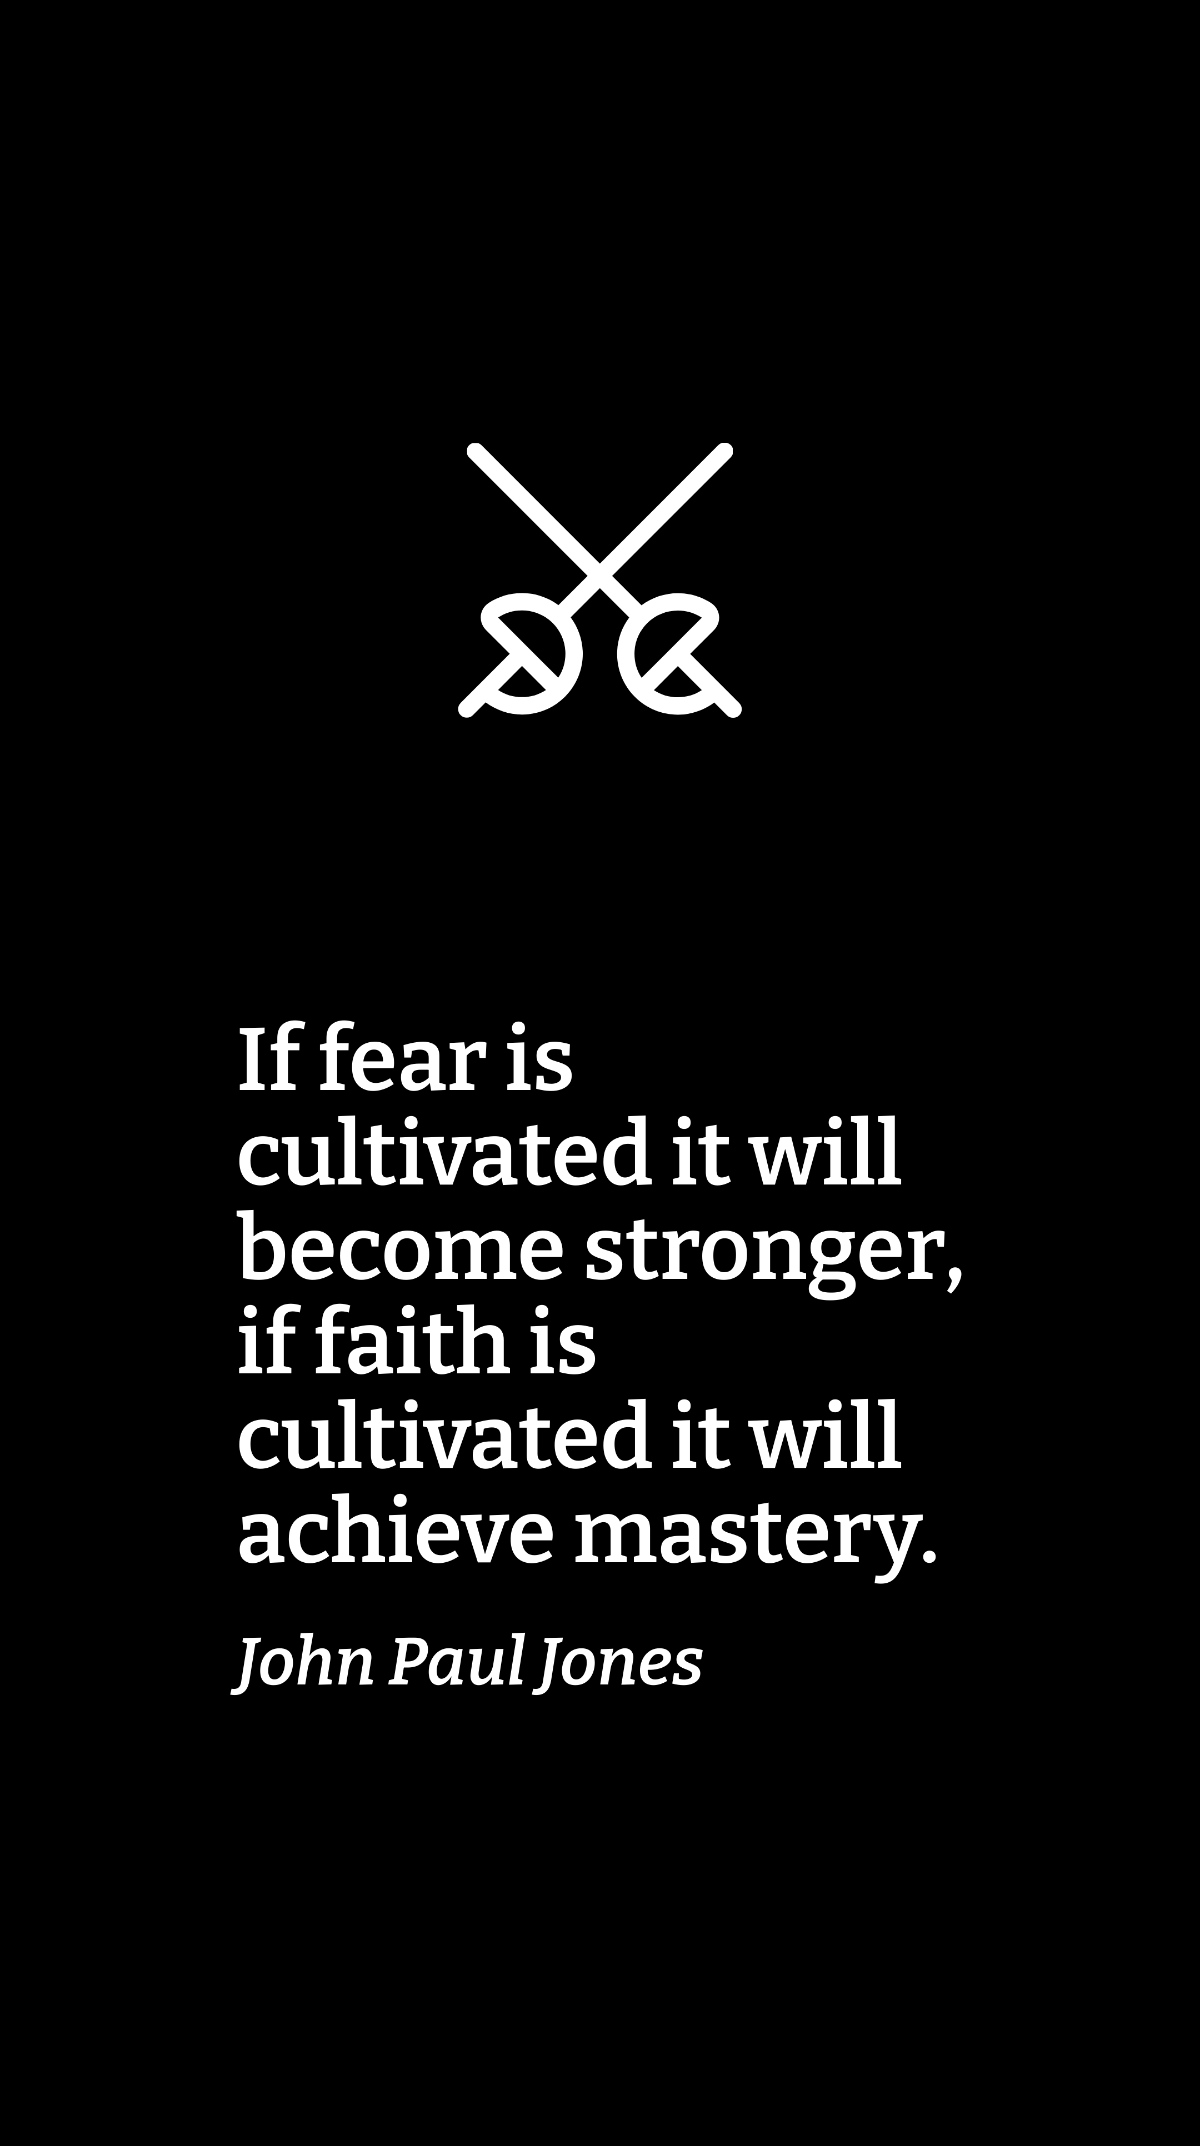 John Paul Jones - If fear is cultivated it will become stronger, if faith is cultivated it will achieve mastery. Template